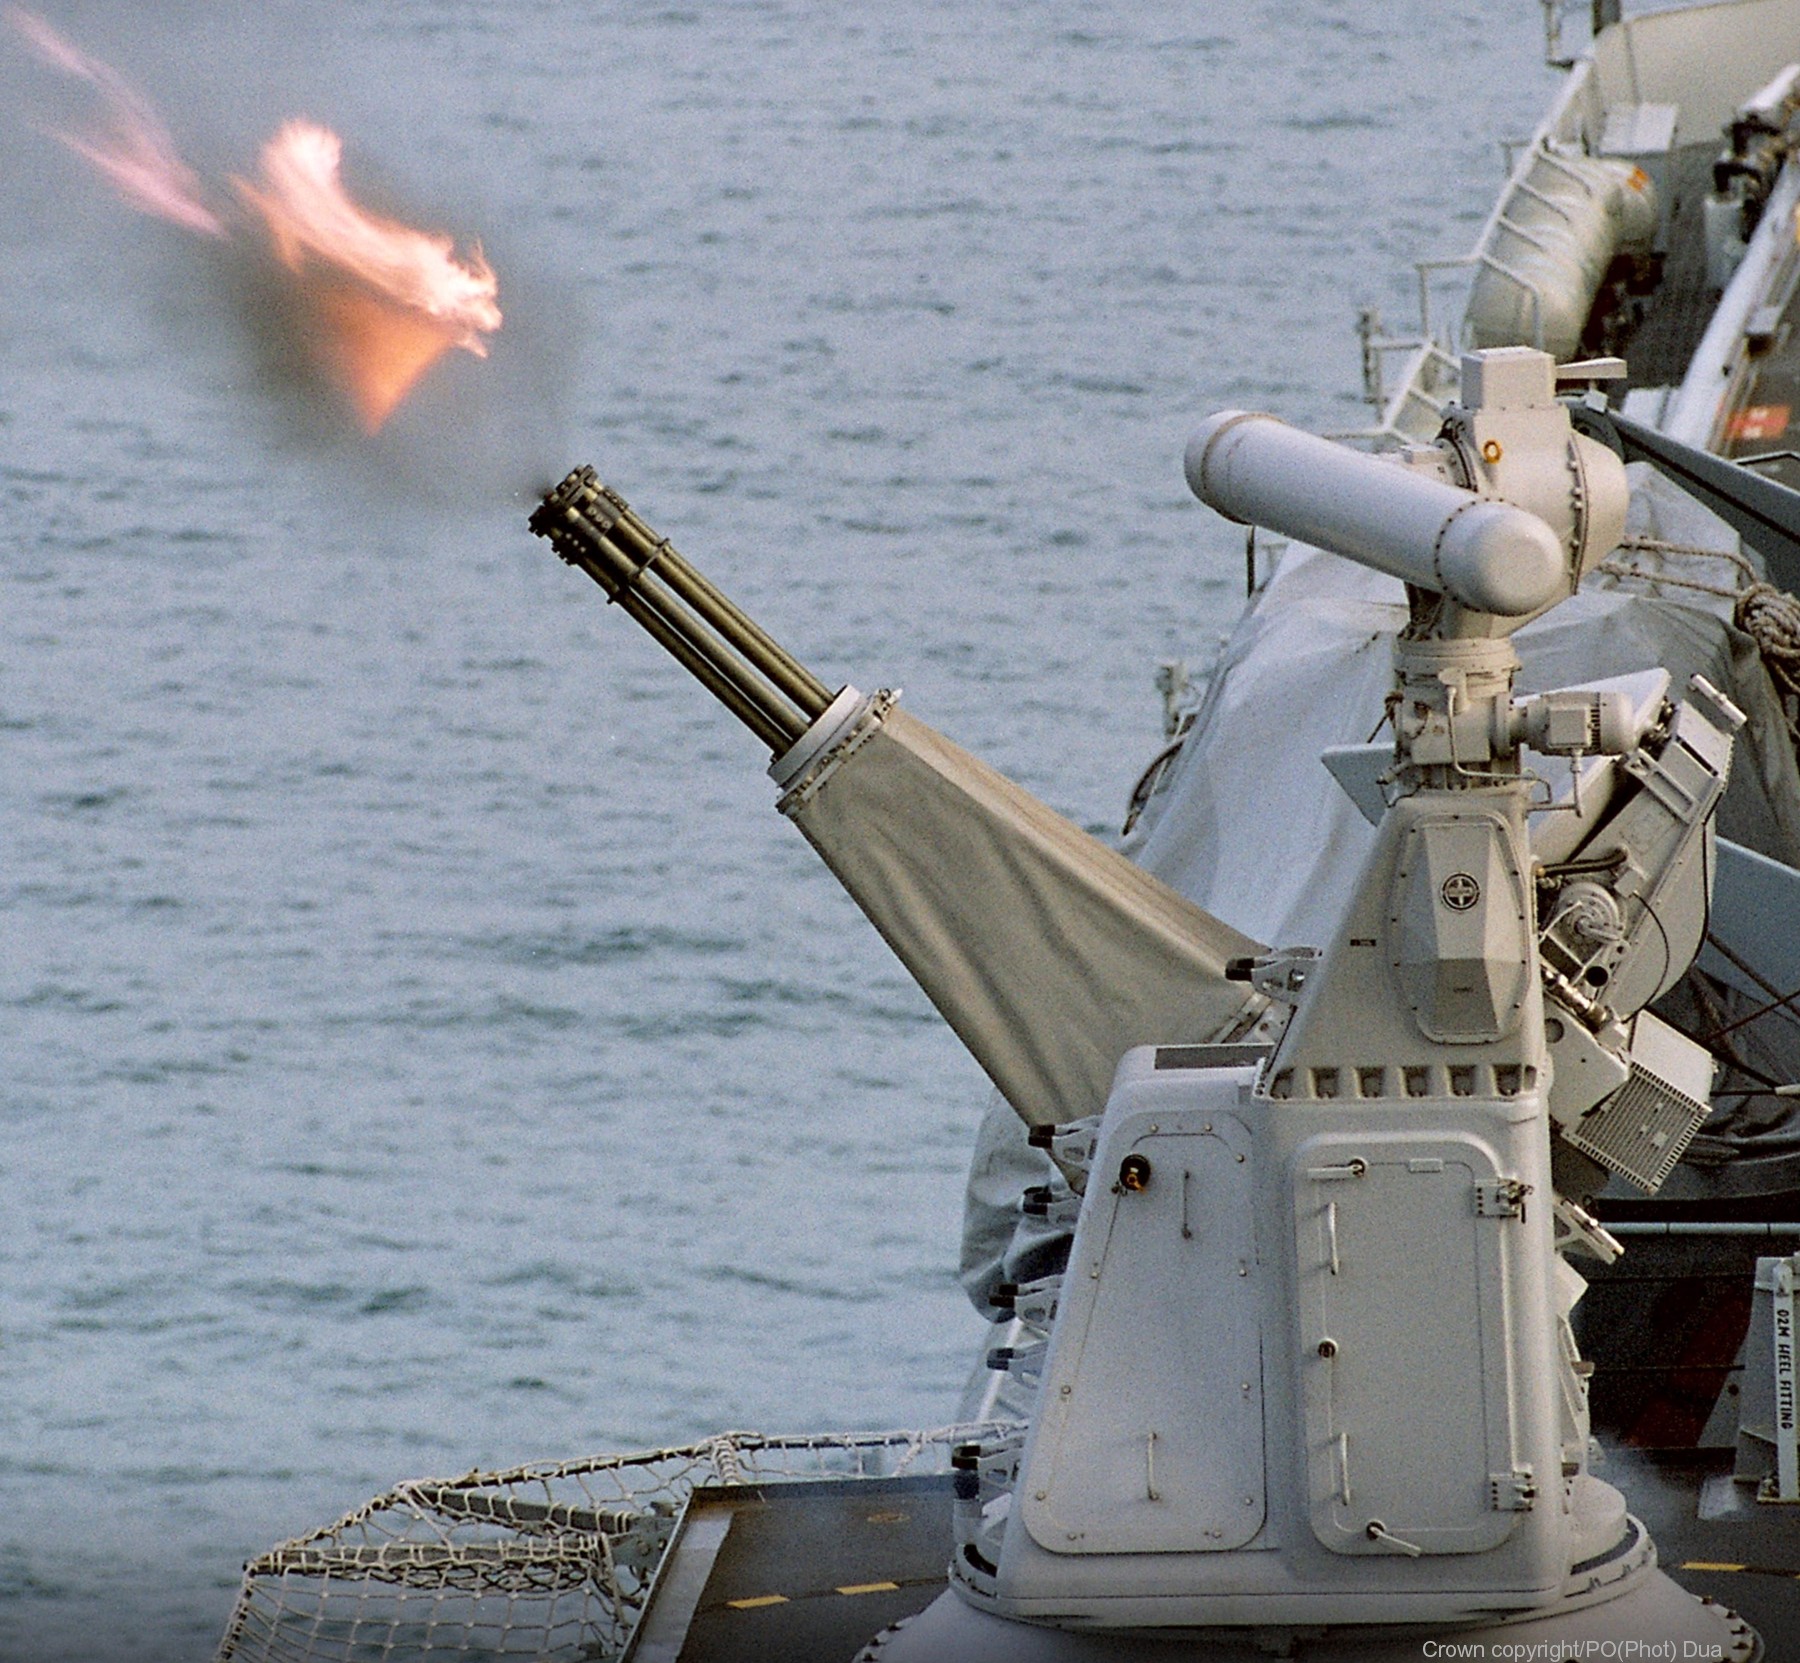 goalkeeper close-in weapon system ciws 30mm thales navy 02